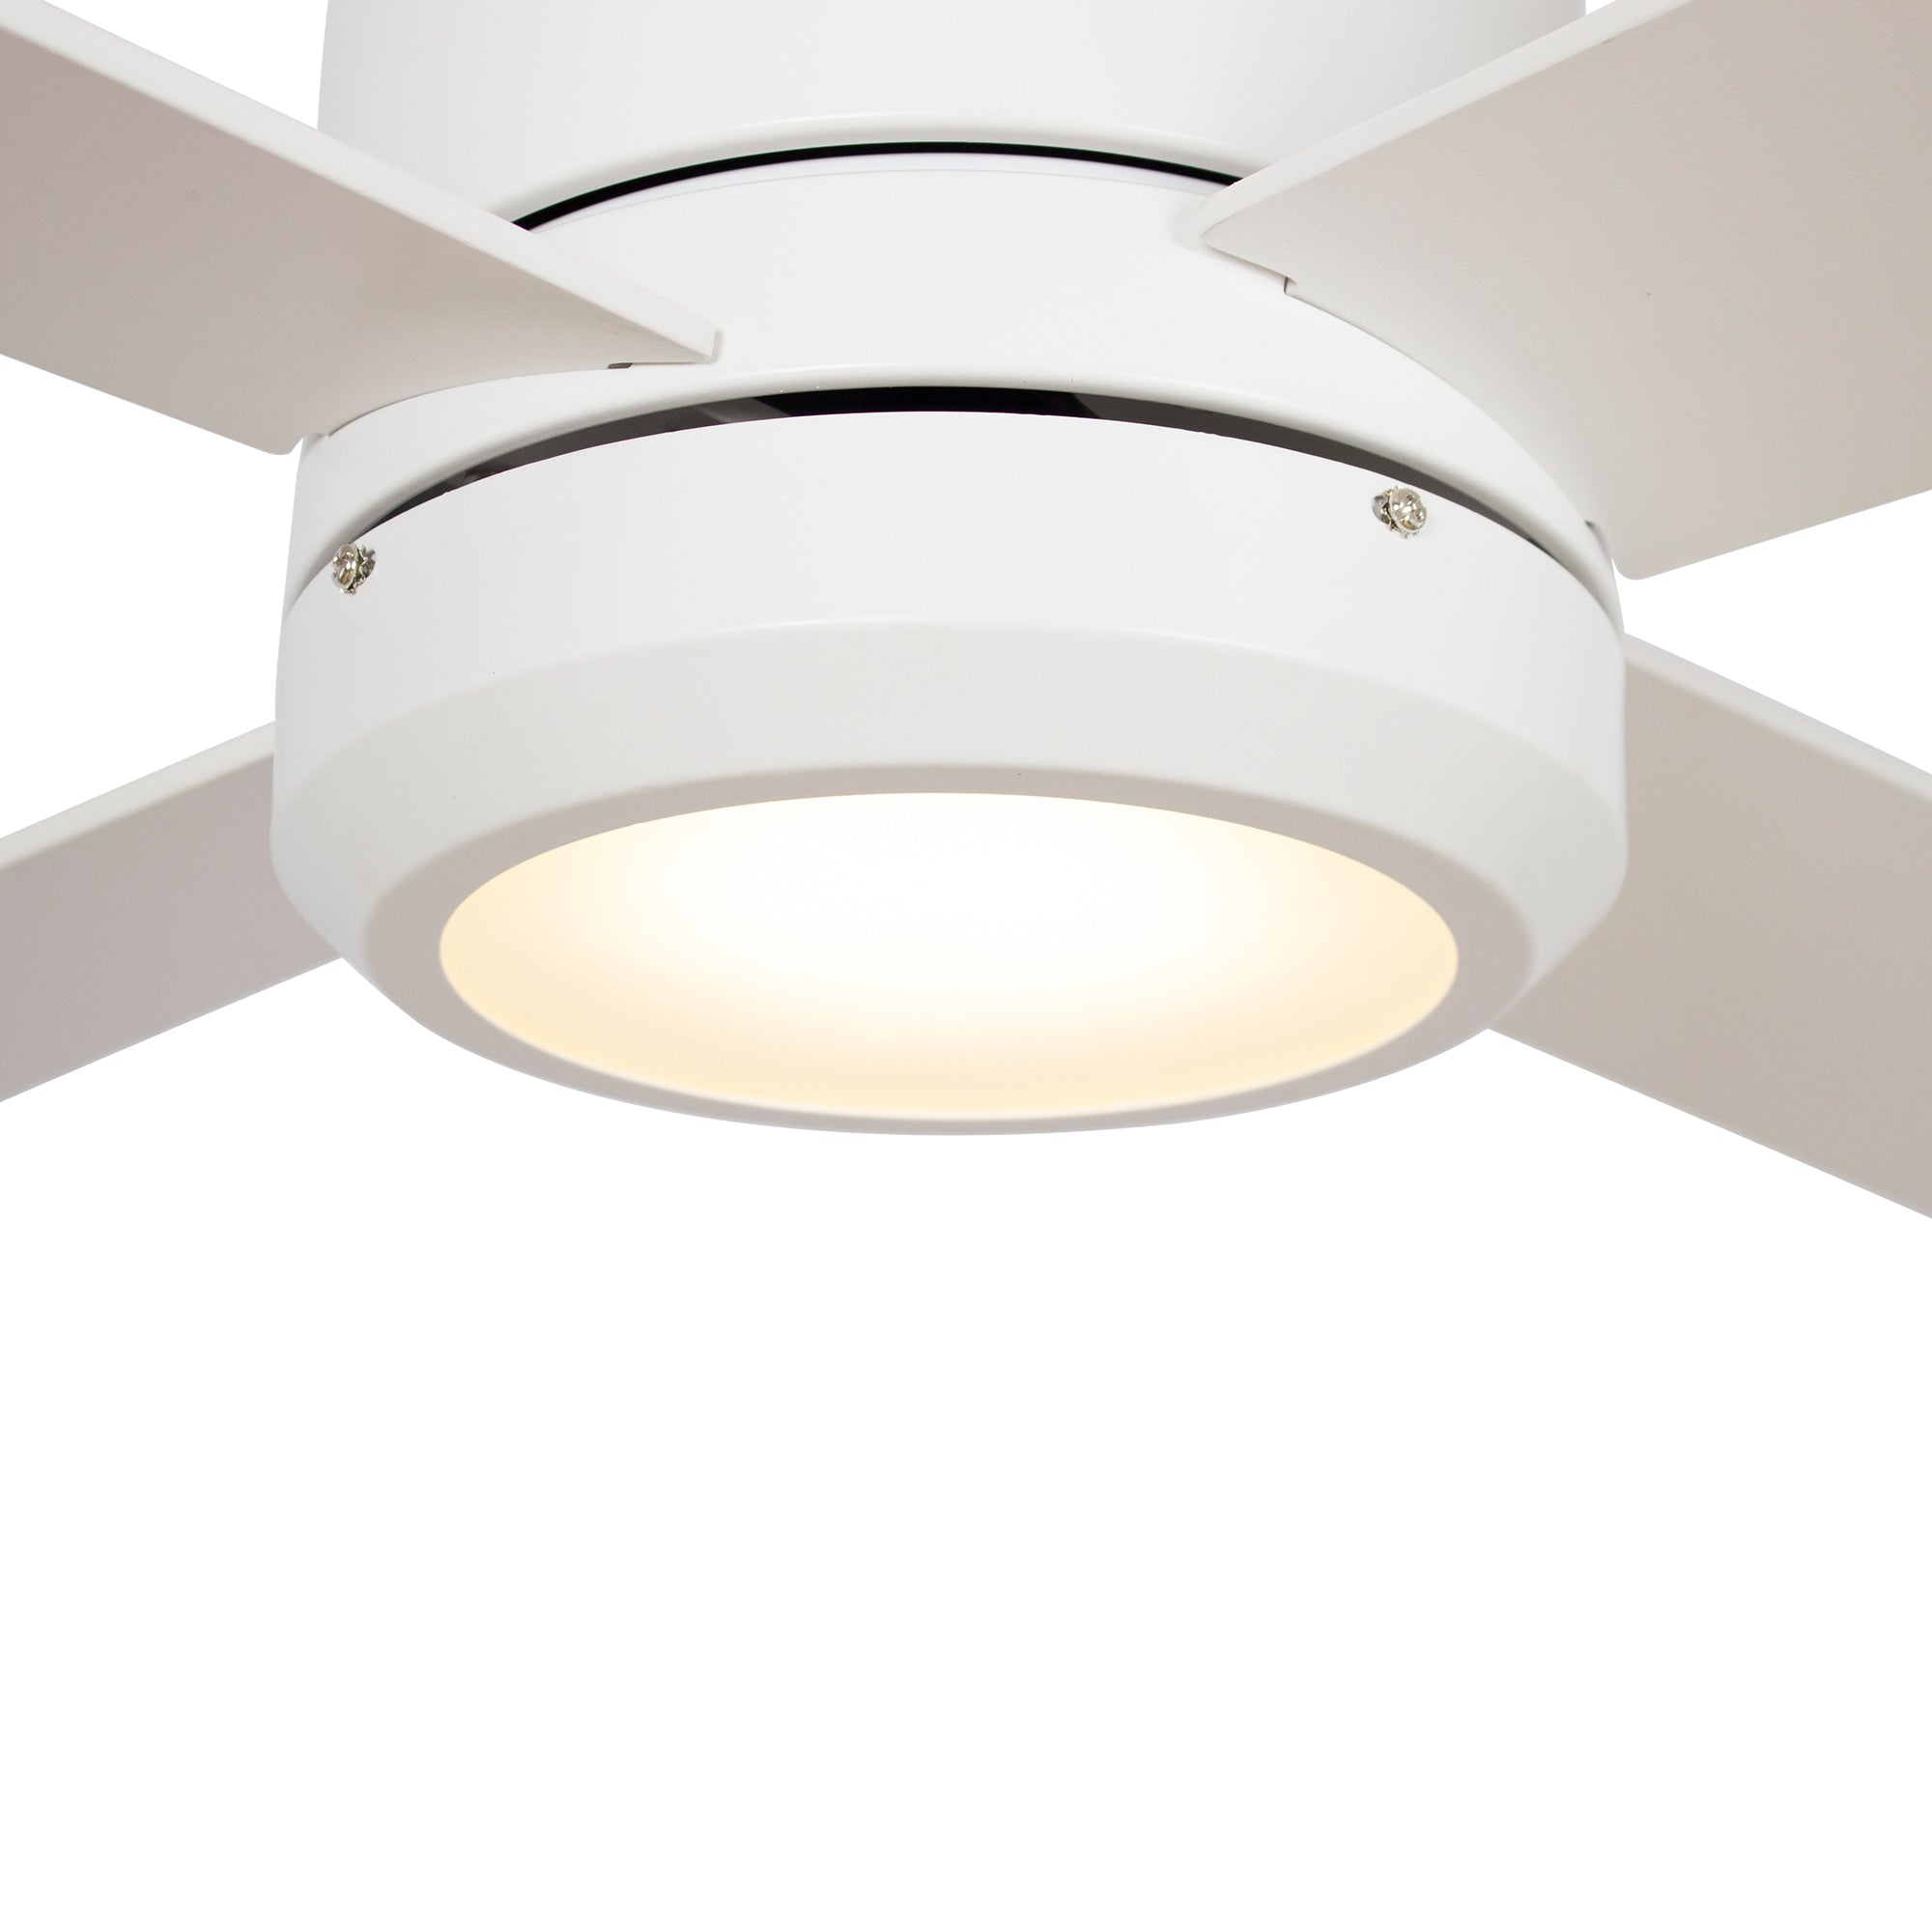 The Smafan Arlo 52&#39;&#39; Smart Ceiling Fan keeps your space cool, bright, and stylish. It is a soft modern masterpiece perfect for your large indoor living spaces. This Wifi smart ceiling fan is a simplicity designing with elegant Plywood blades and compatible with LED Light. The fan features wall control, Wi-Fi apps, Siri Shortcut and Voice control technology (compatible with Amazon Alexa and Google Home Assistant ) to set fan preferences. 